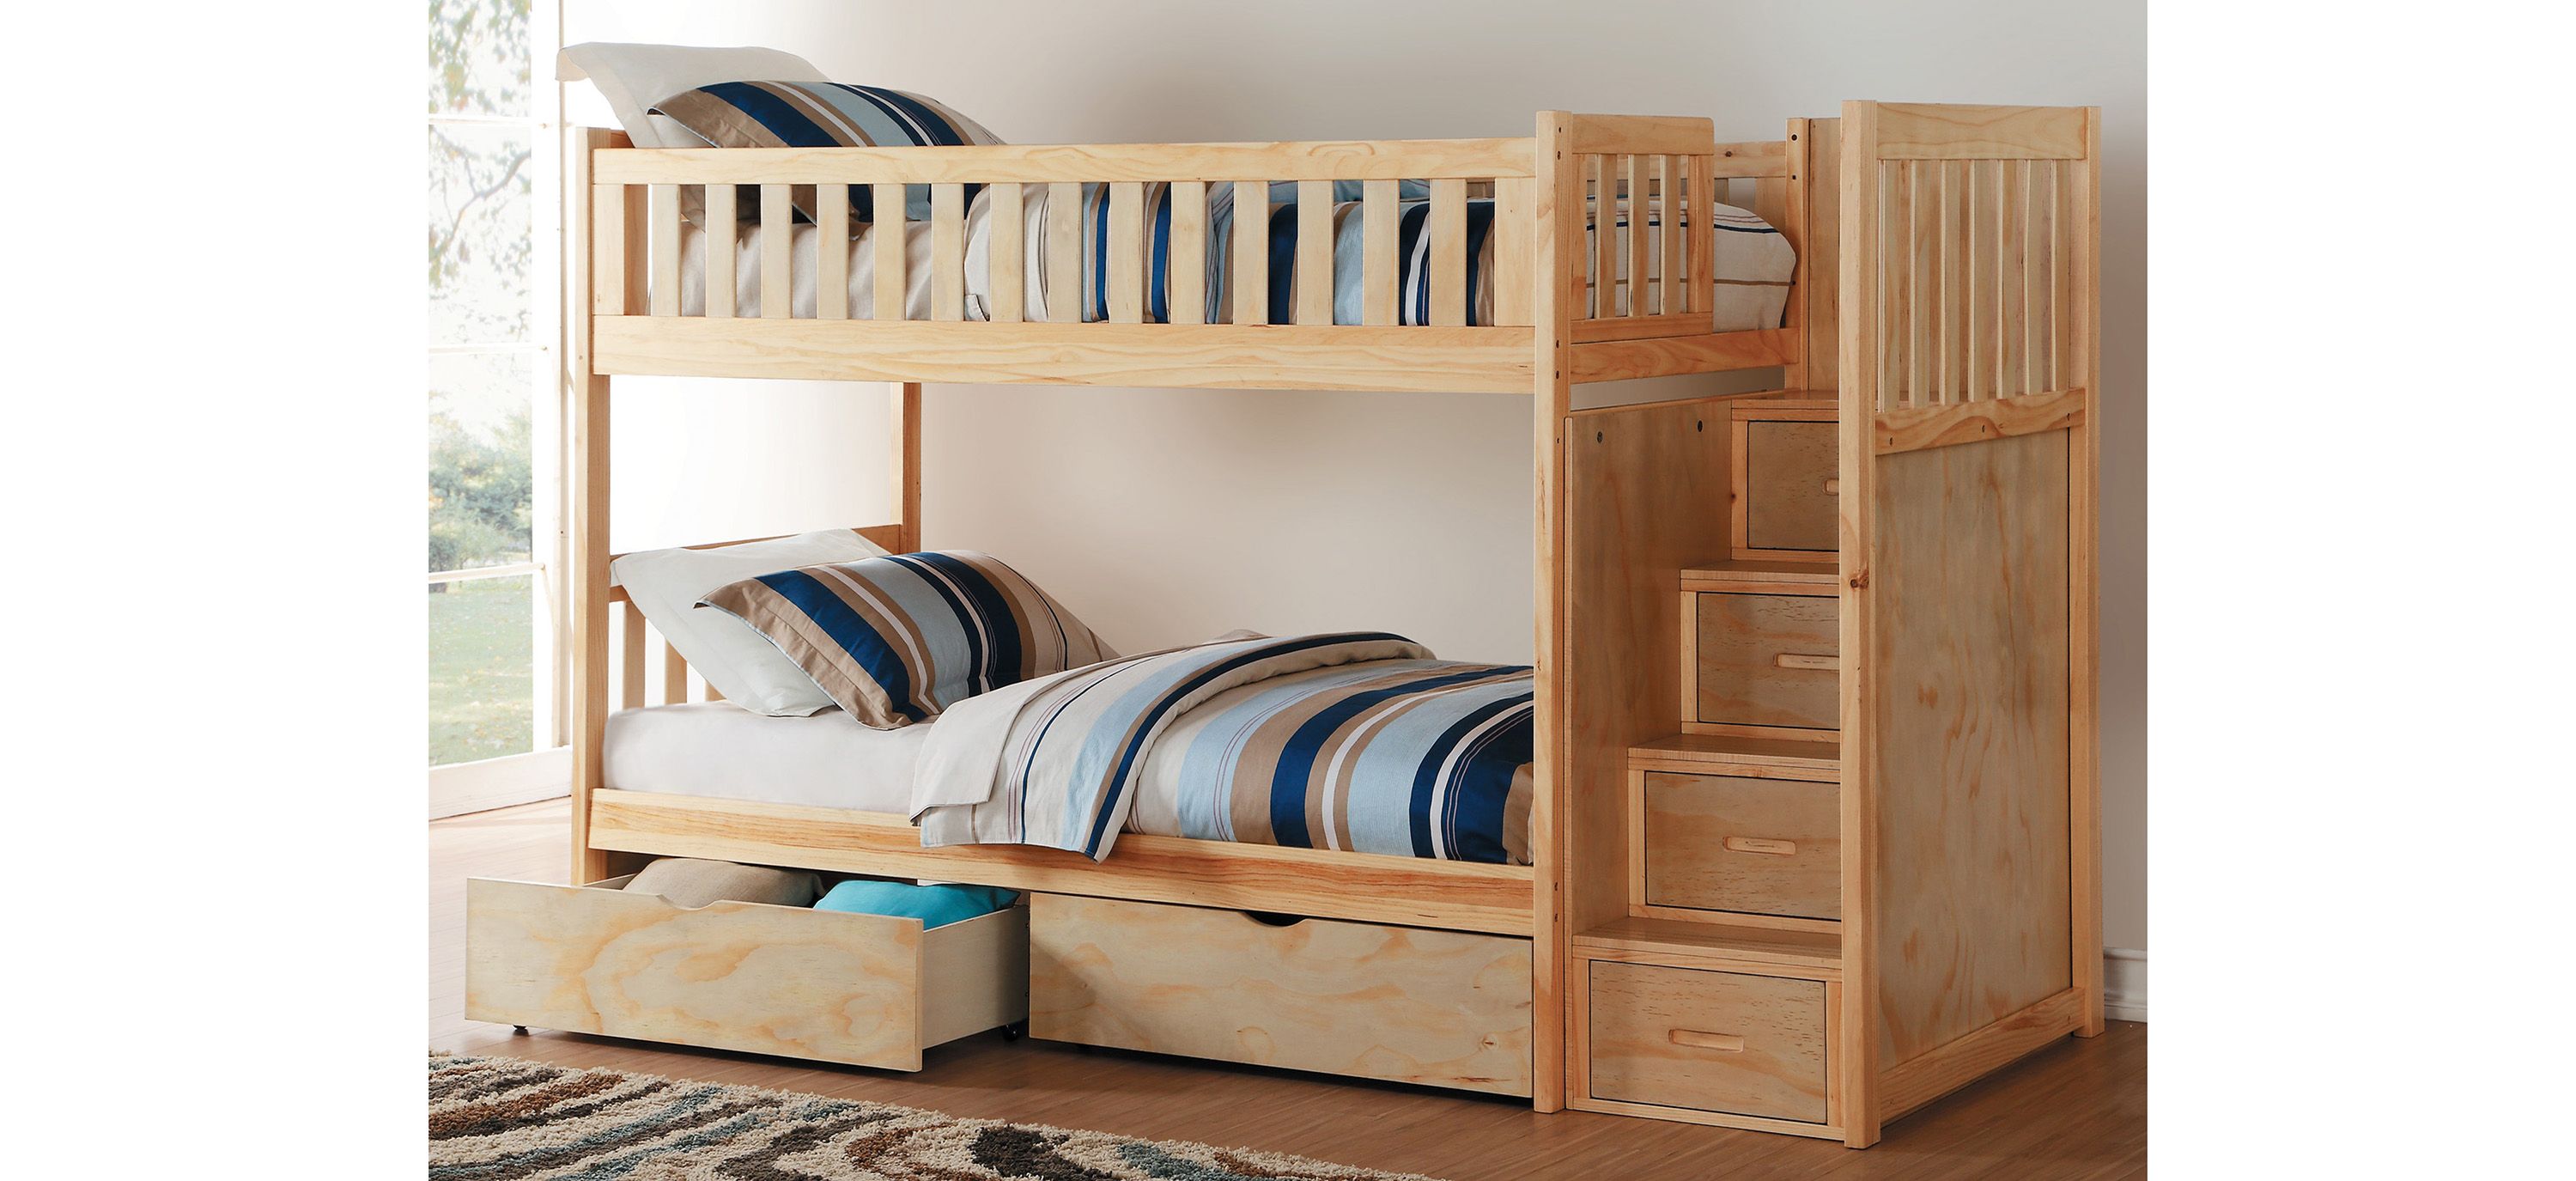 Carissa Bunk Bed with Storage & Staircase